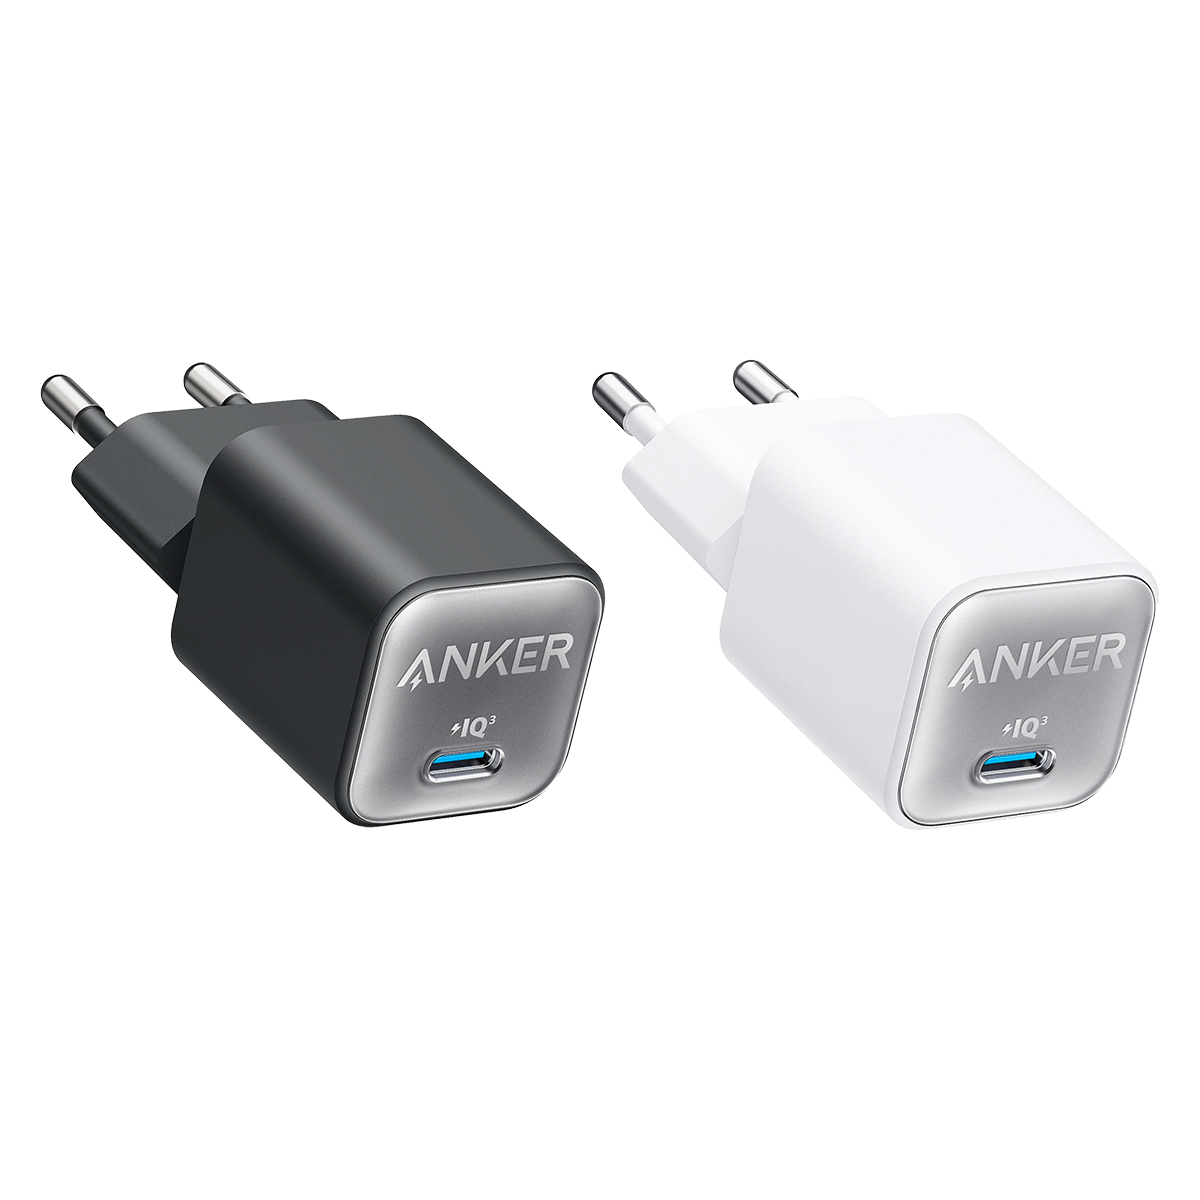 Anker 511 Charger (Nano) with USB-C to Lightning Cable